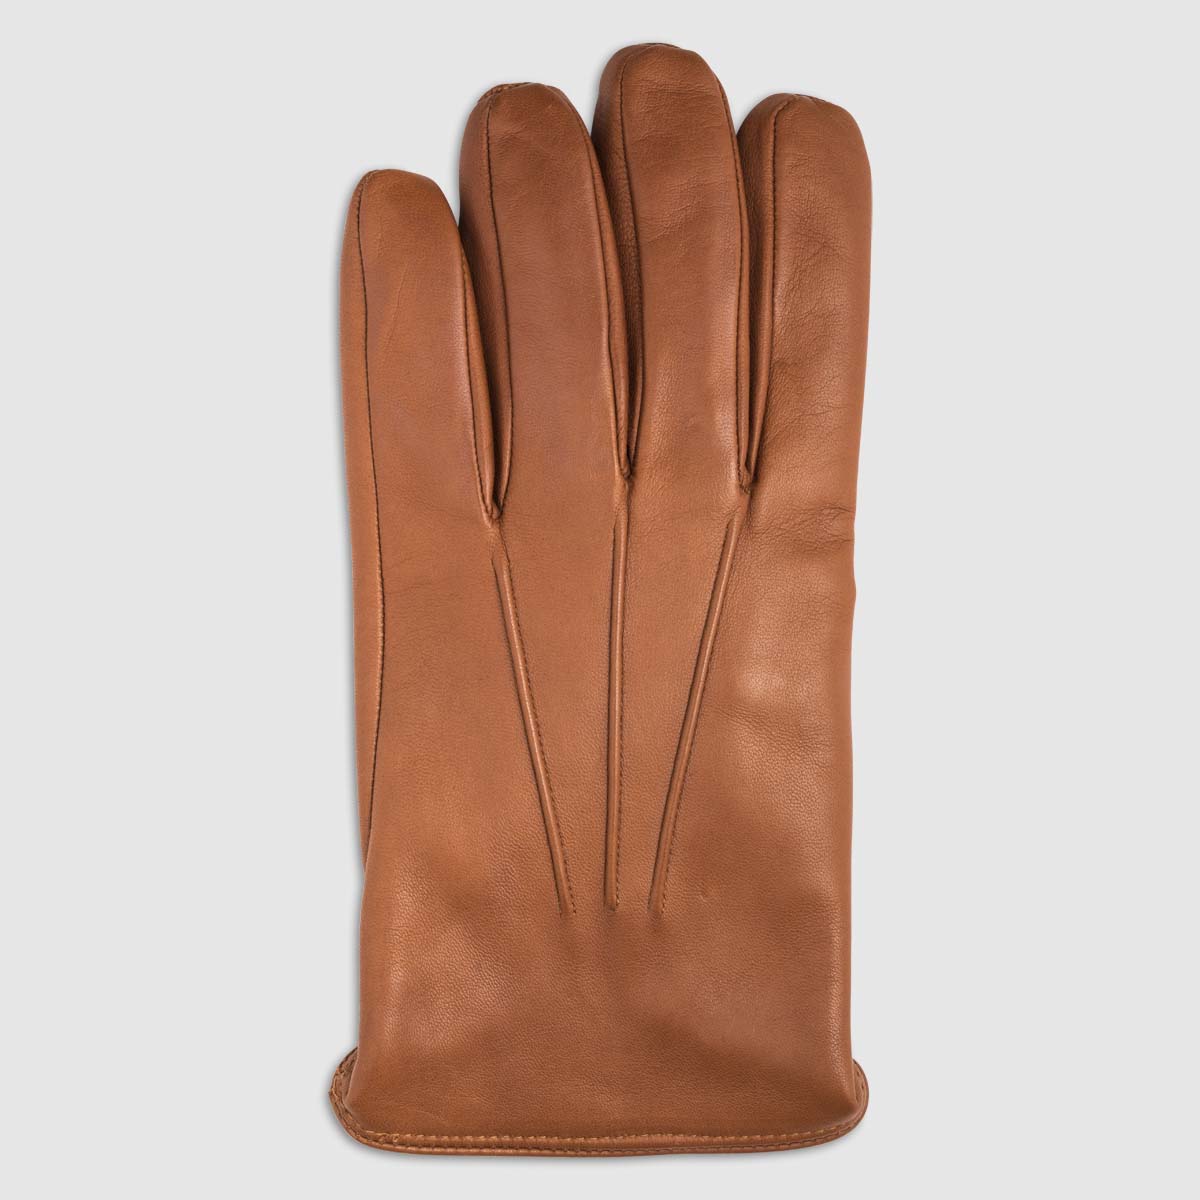 Nappa Leather Glove with Cashmere Lining in Cognac Alpo Guanti on sale 2022